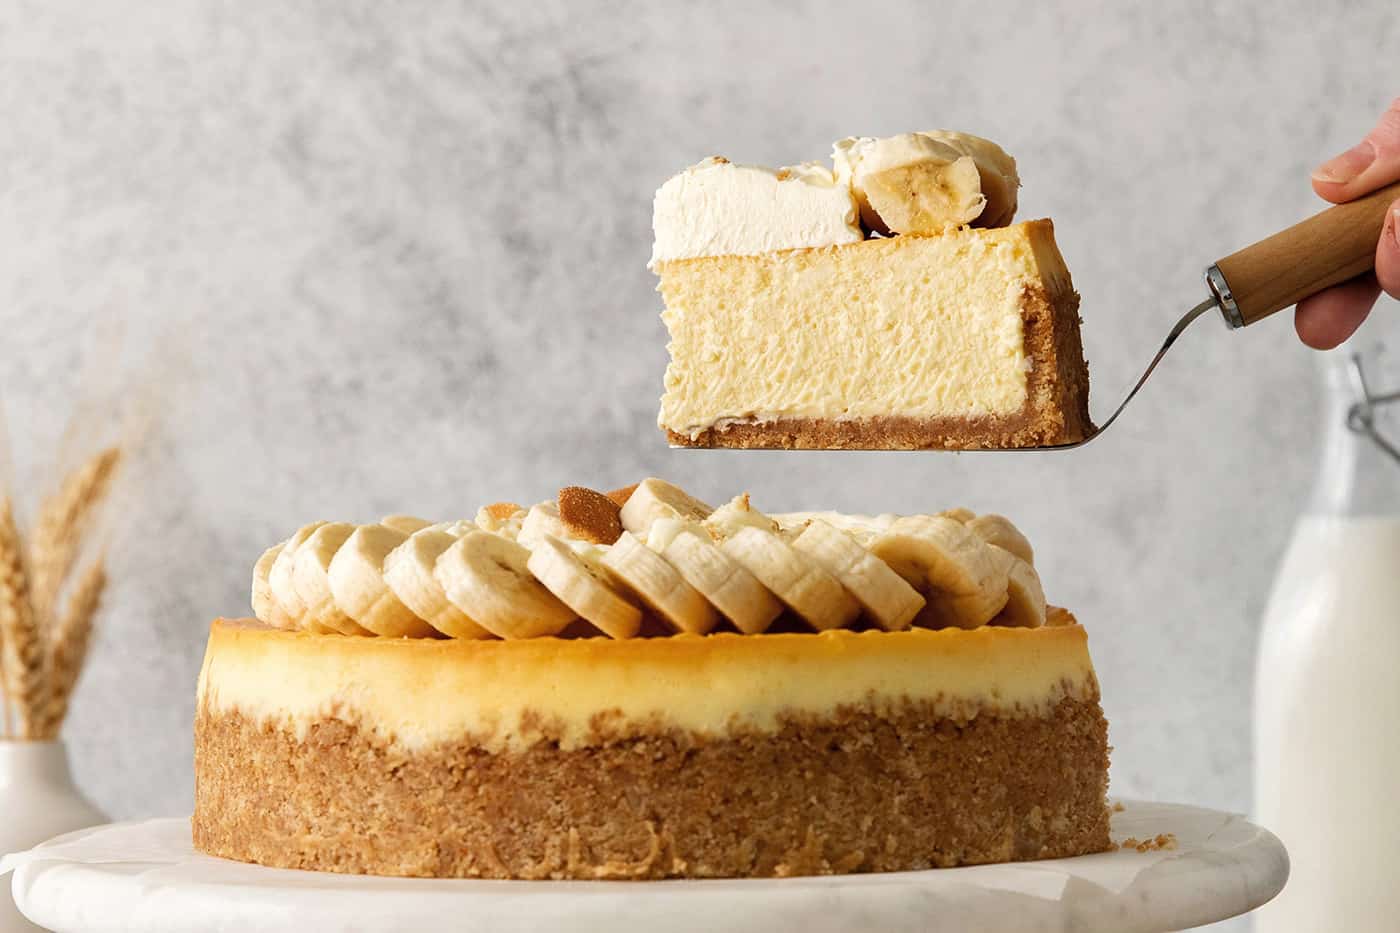 A slice of banana pudding cheesecake being served